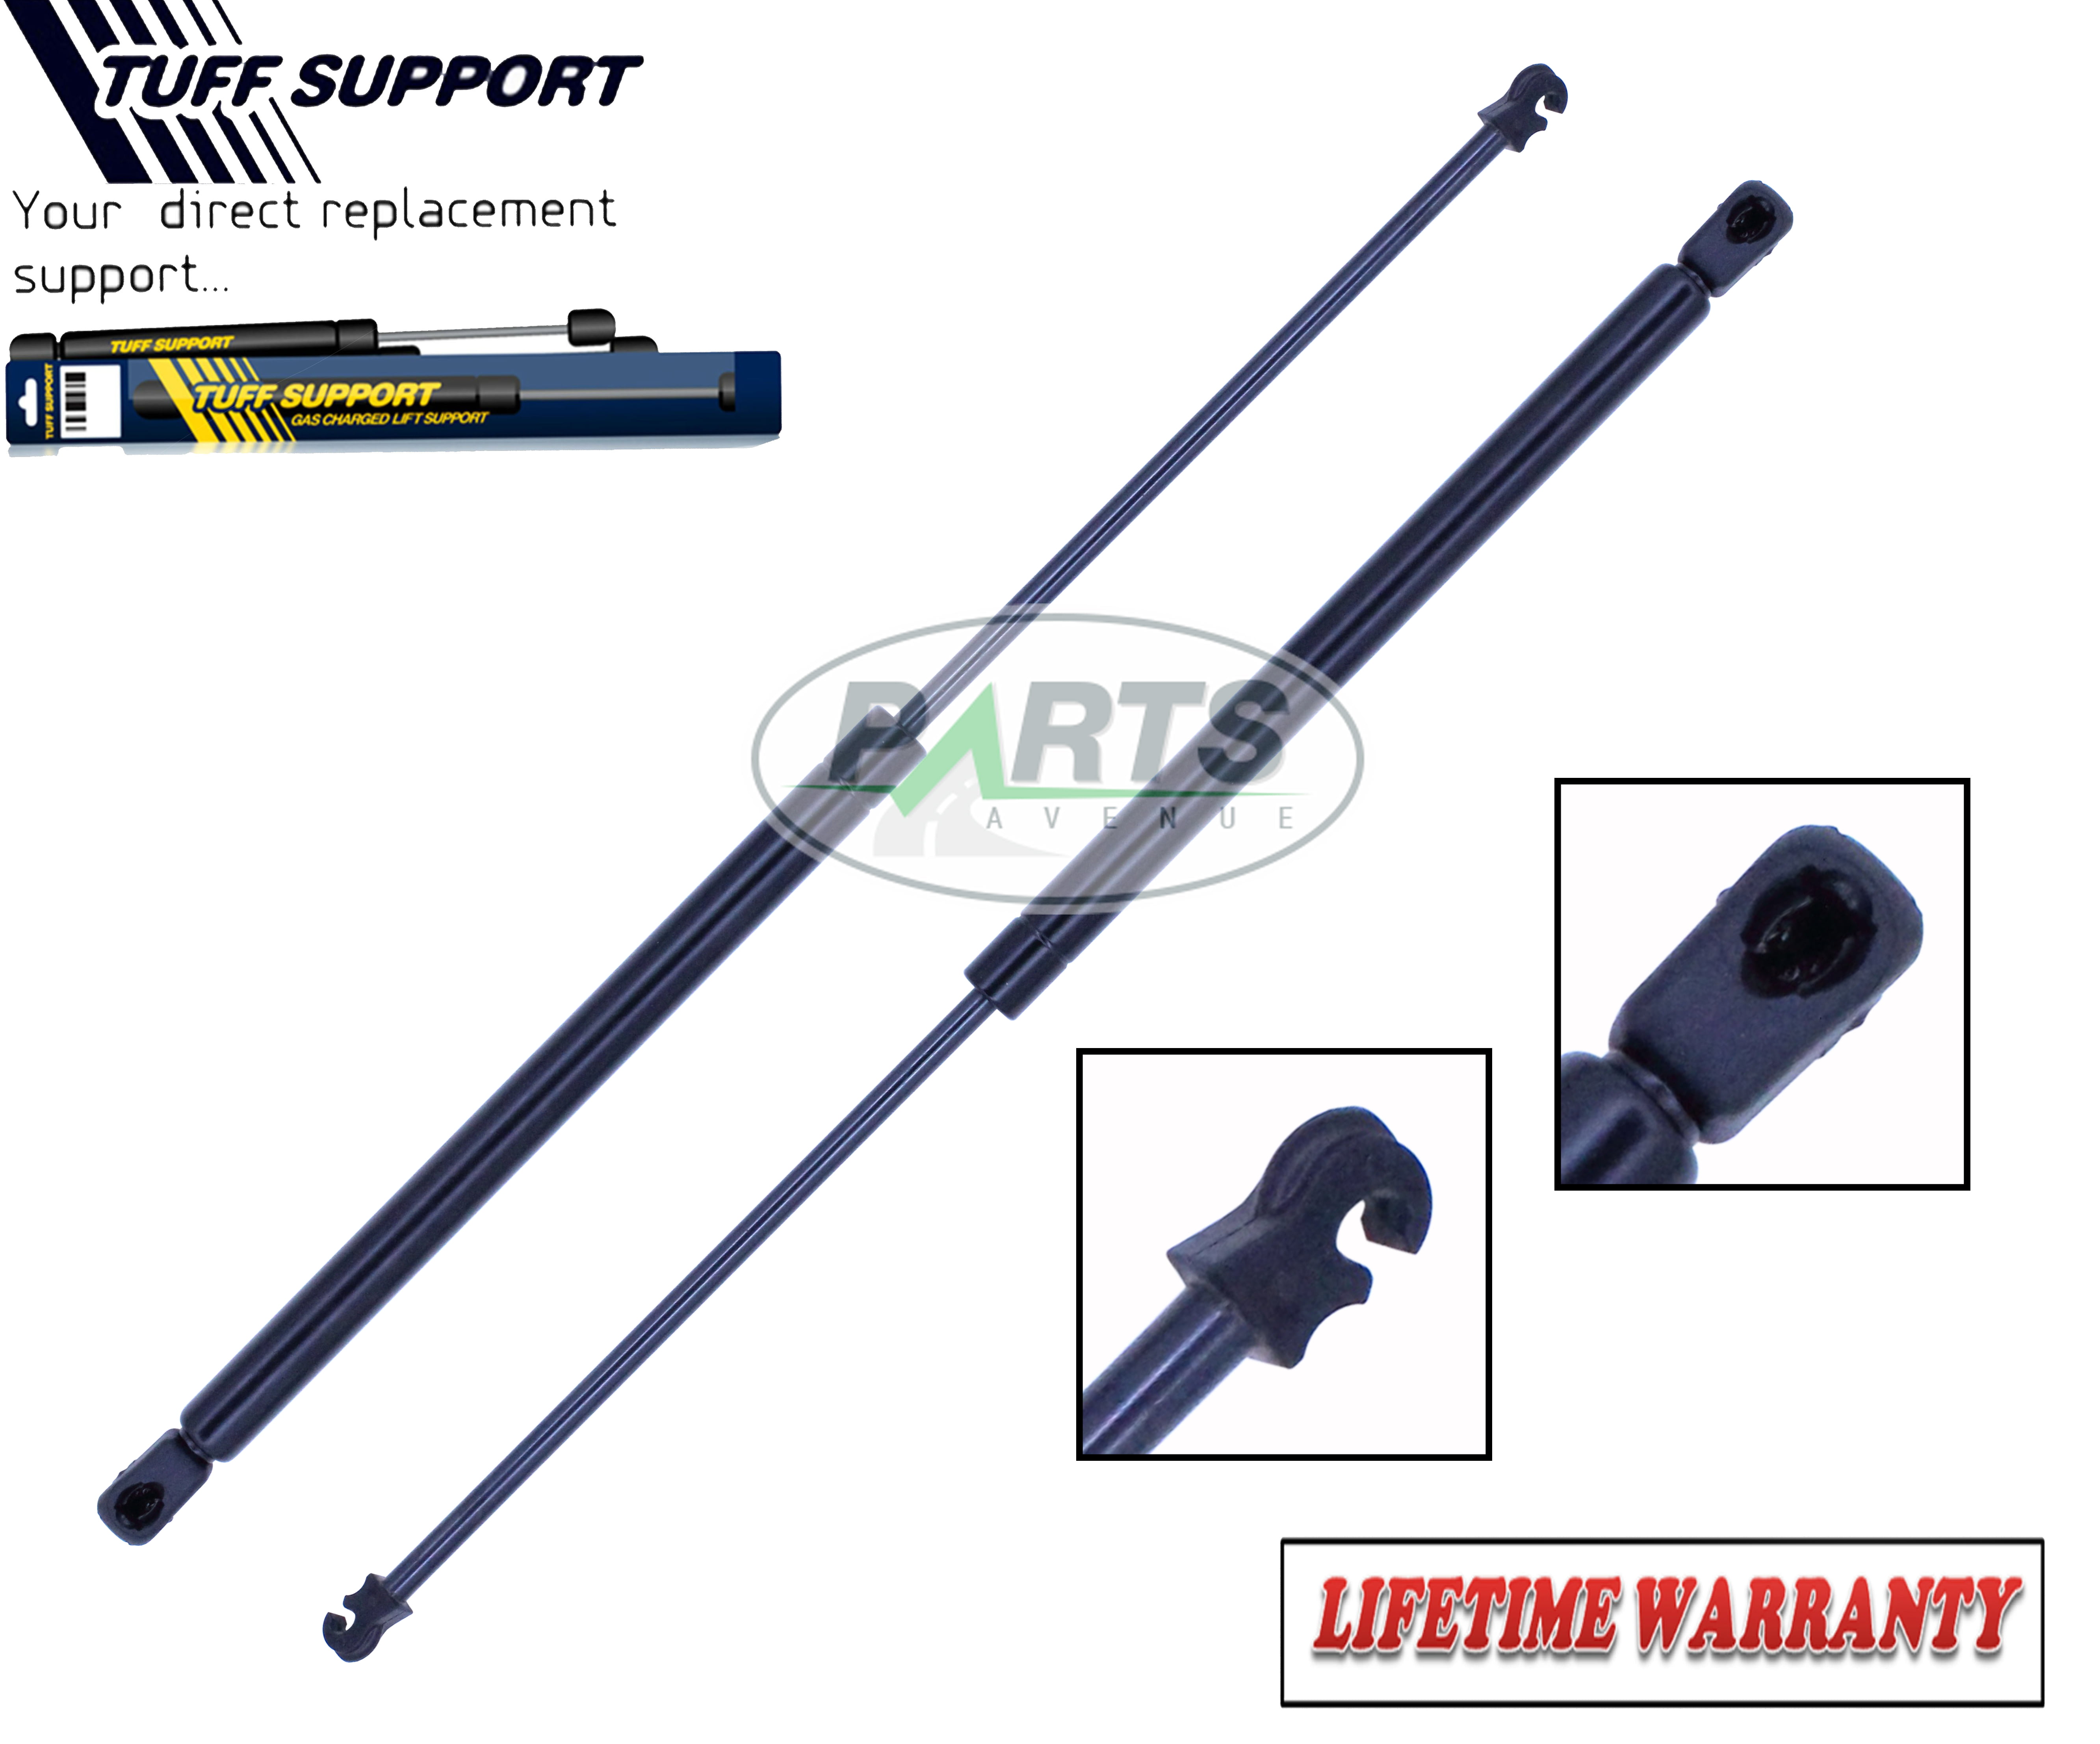 Trunk Shock Tuff Support 612671 9485546